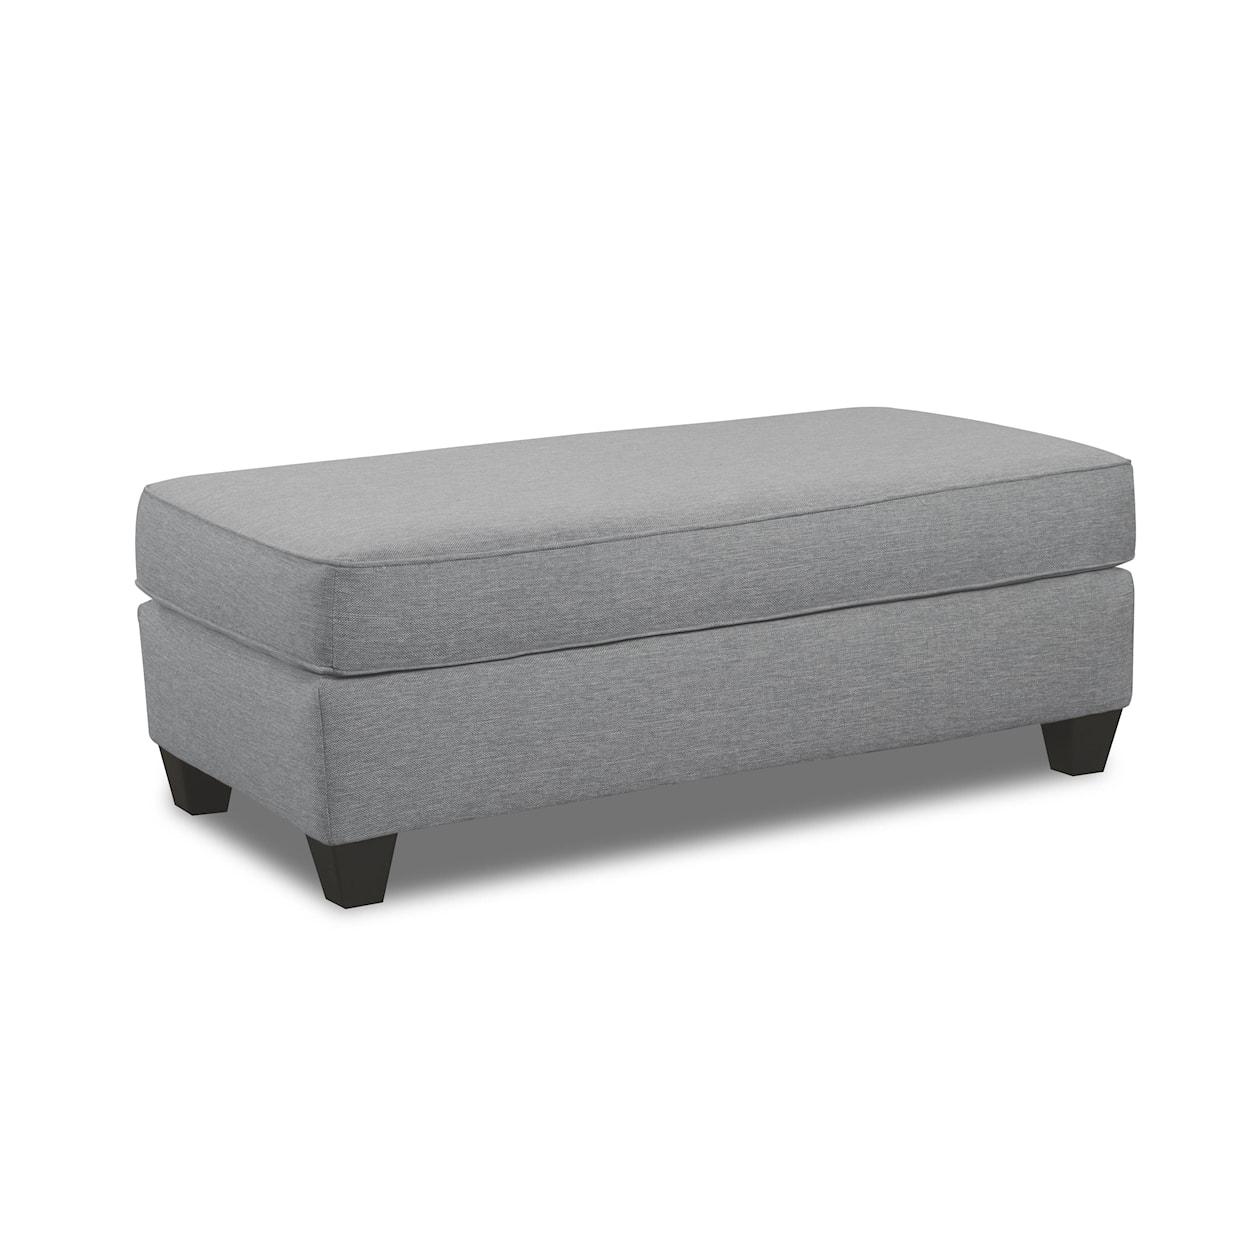 Behold Home 4990 Rome Ottoman with Exposed Wooden Legs 